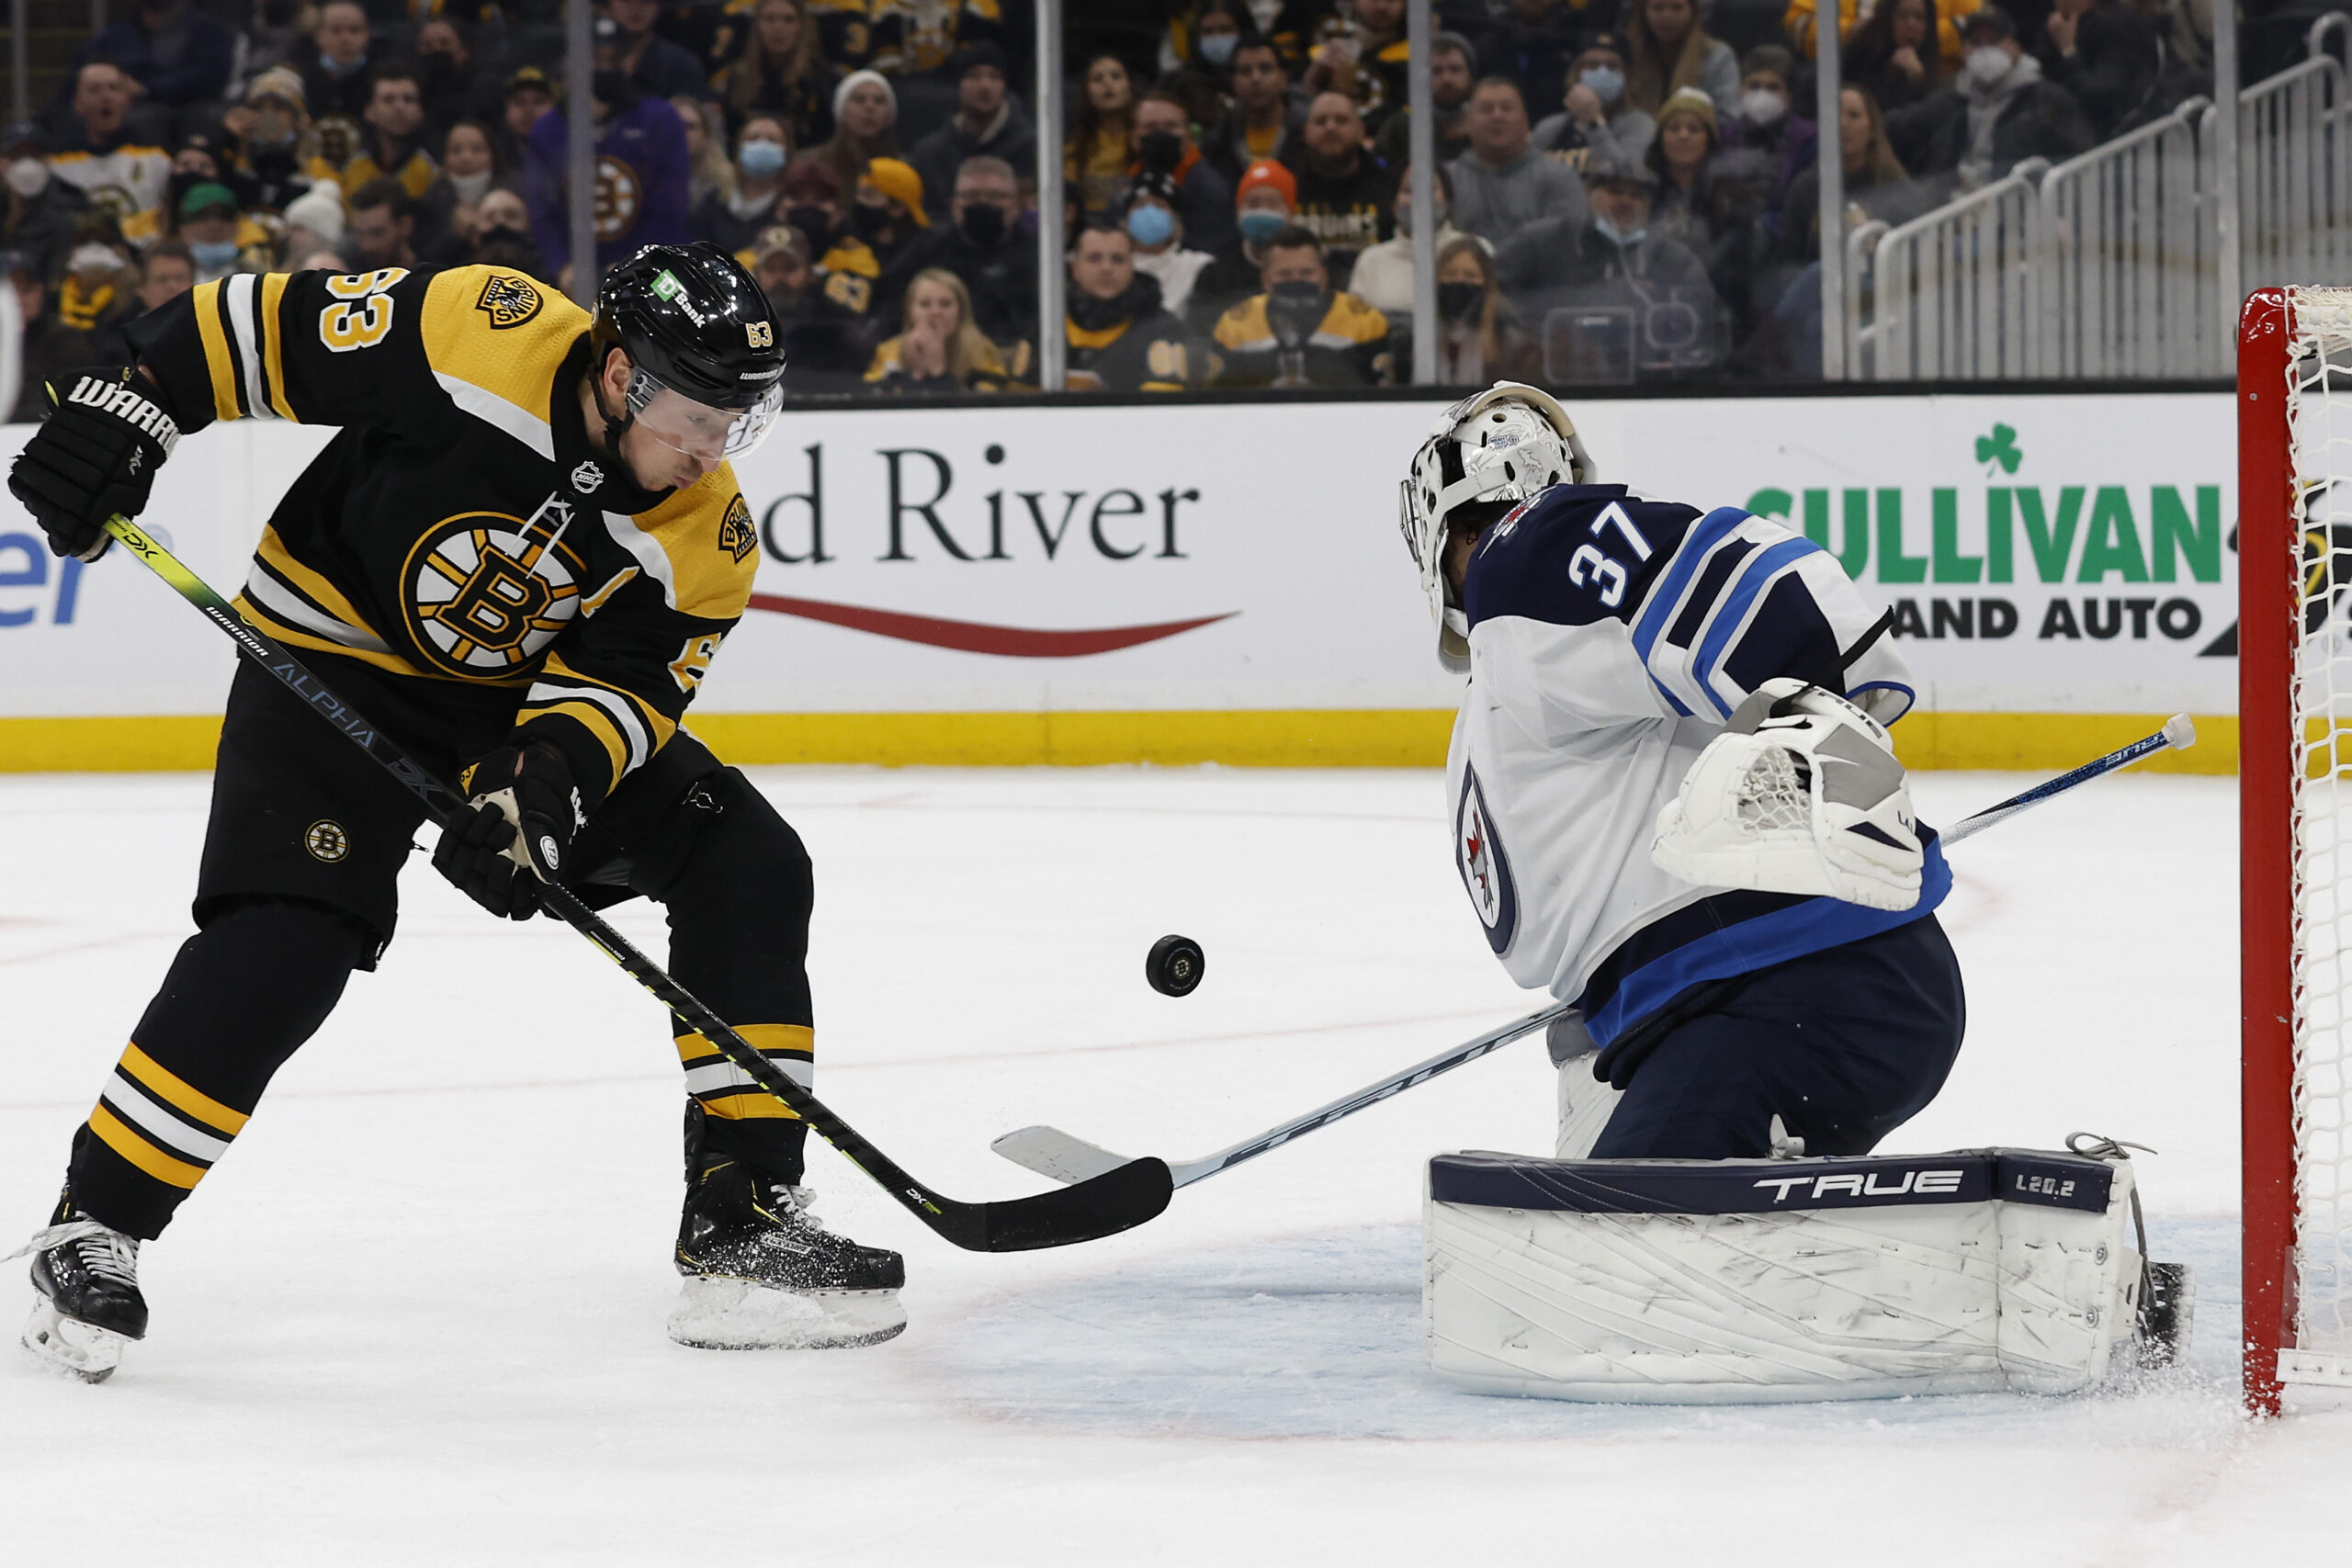 Jan 22, 2022; Boston, Massachusetts, USA;Boston Bruins left wing Brad Marchand (63) looks for a rebound in front of Winnipeg Jets goaltender Connor Hellebuyck (37)  during the third period at TD Garden. Mandatory Credit: Winslow Townson-USA TODAY Sports